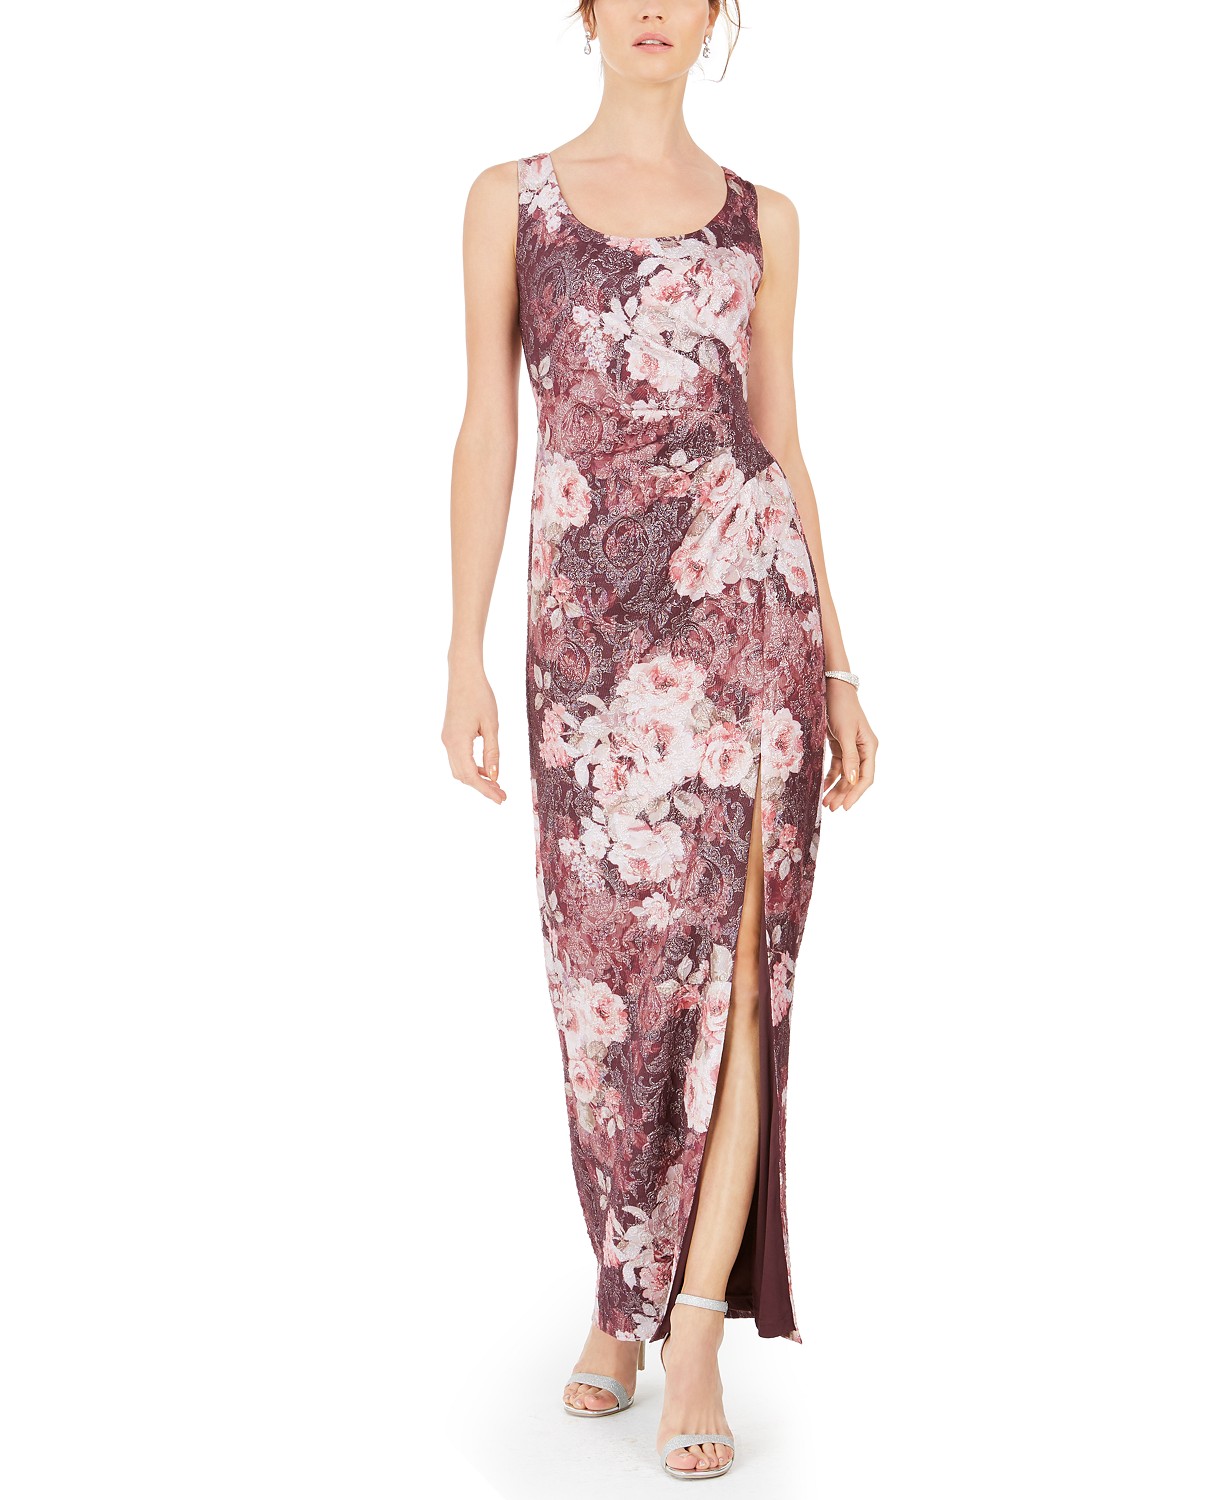 woocommerce-673321-2209615.cloudwaysapps.com-adrianna-papell-womens-metallic-floral-print-gown-dress